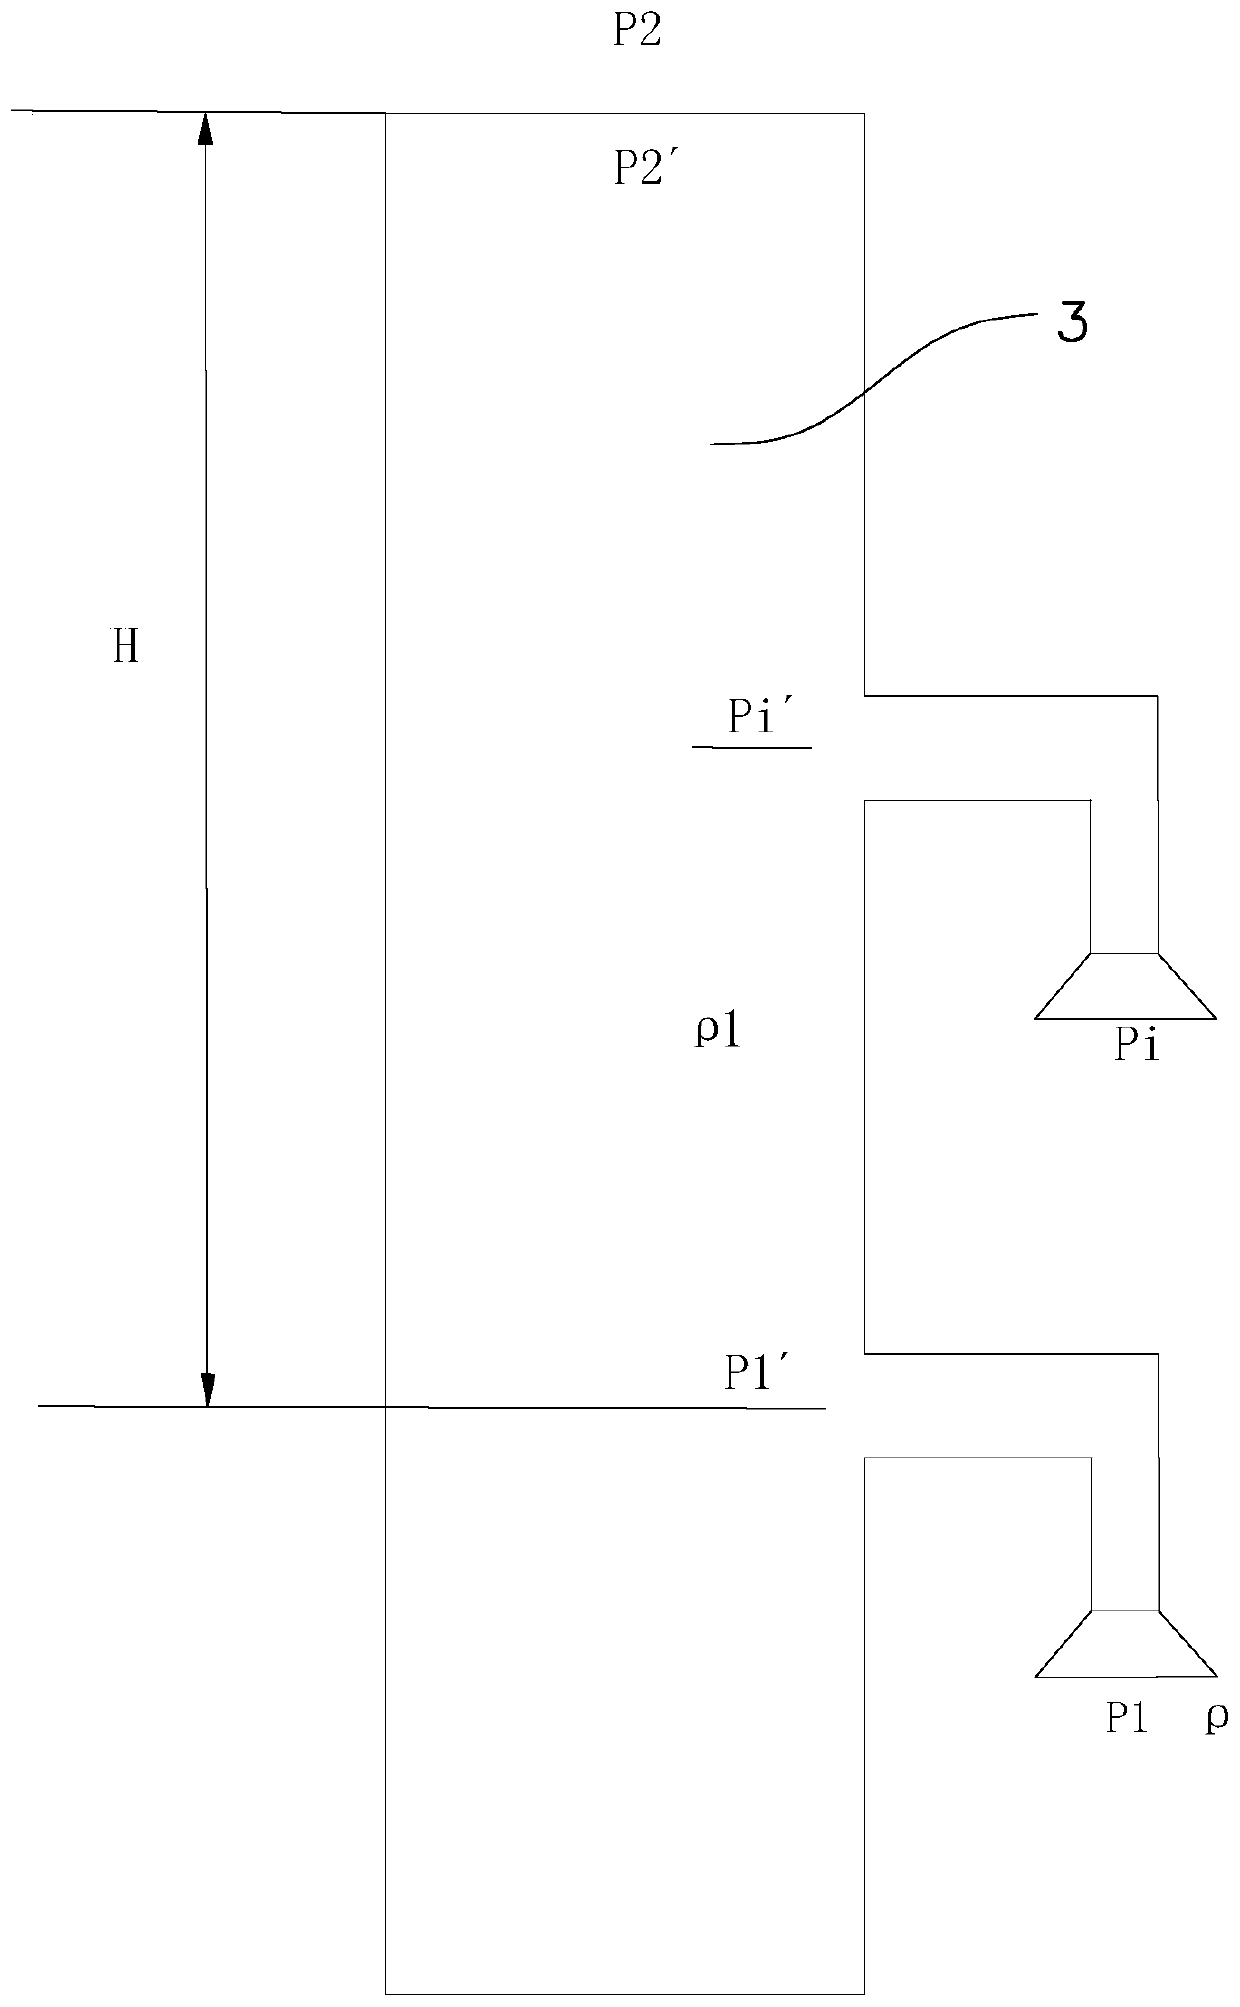 Smoke exhaust system for common flue of building and control method thereof